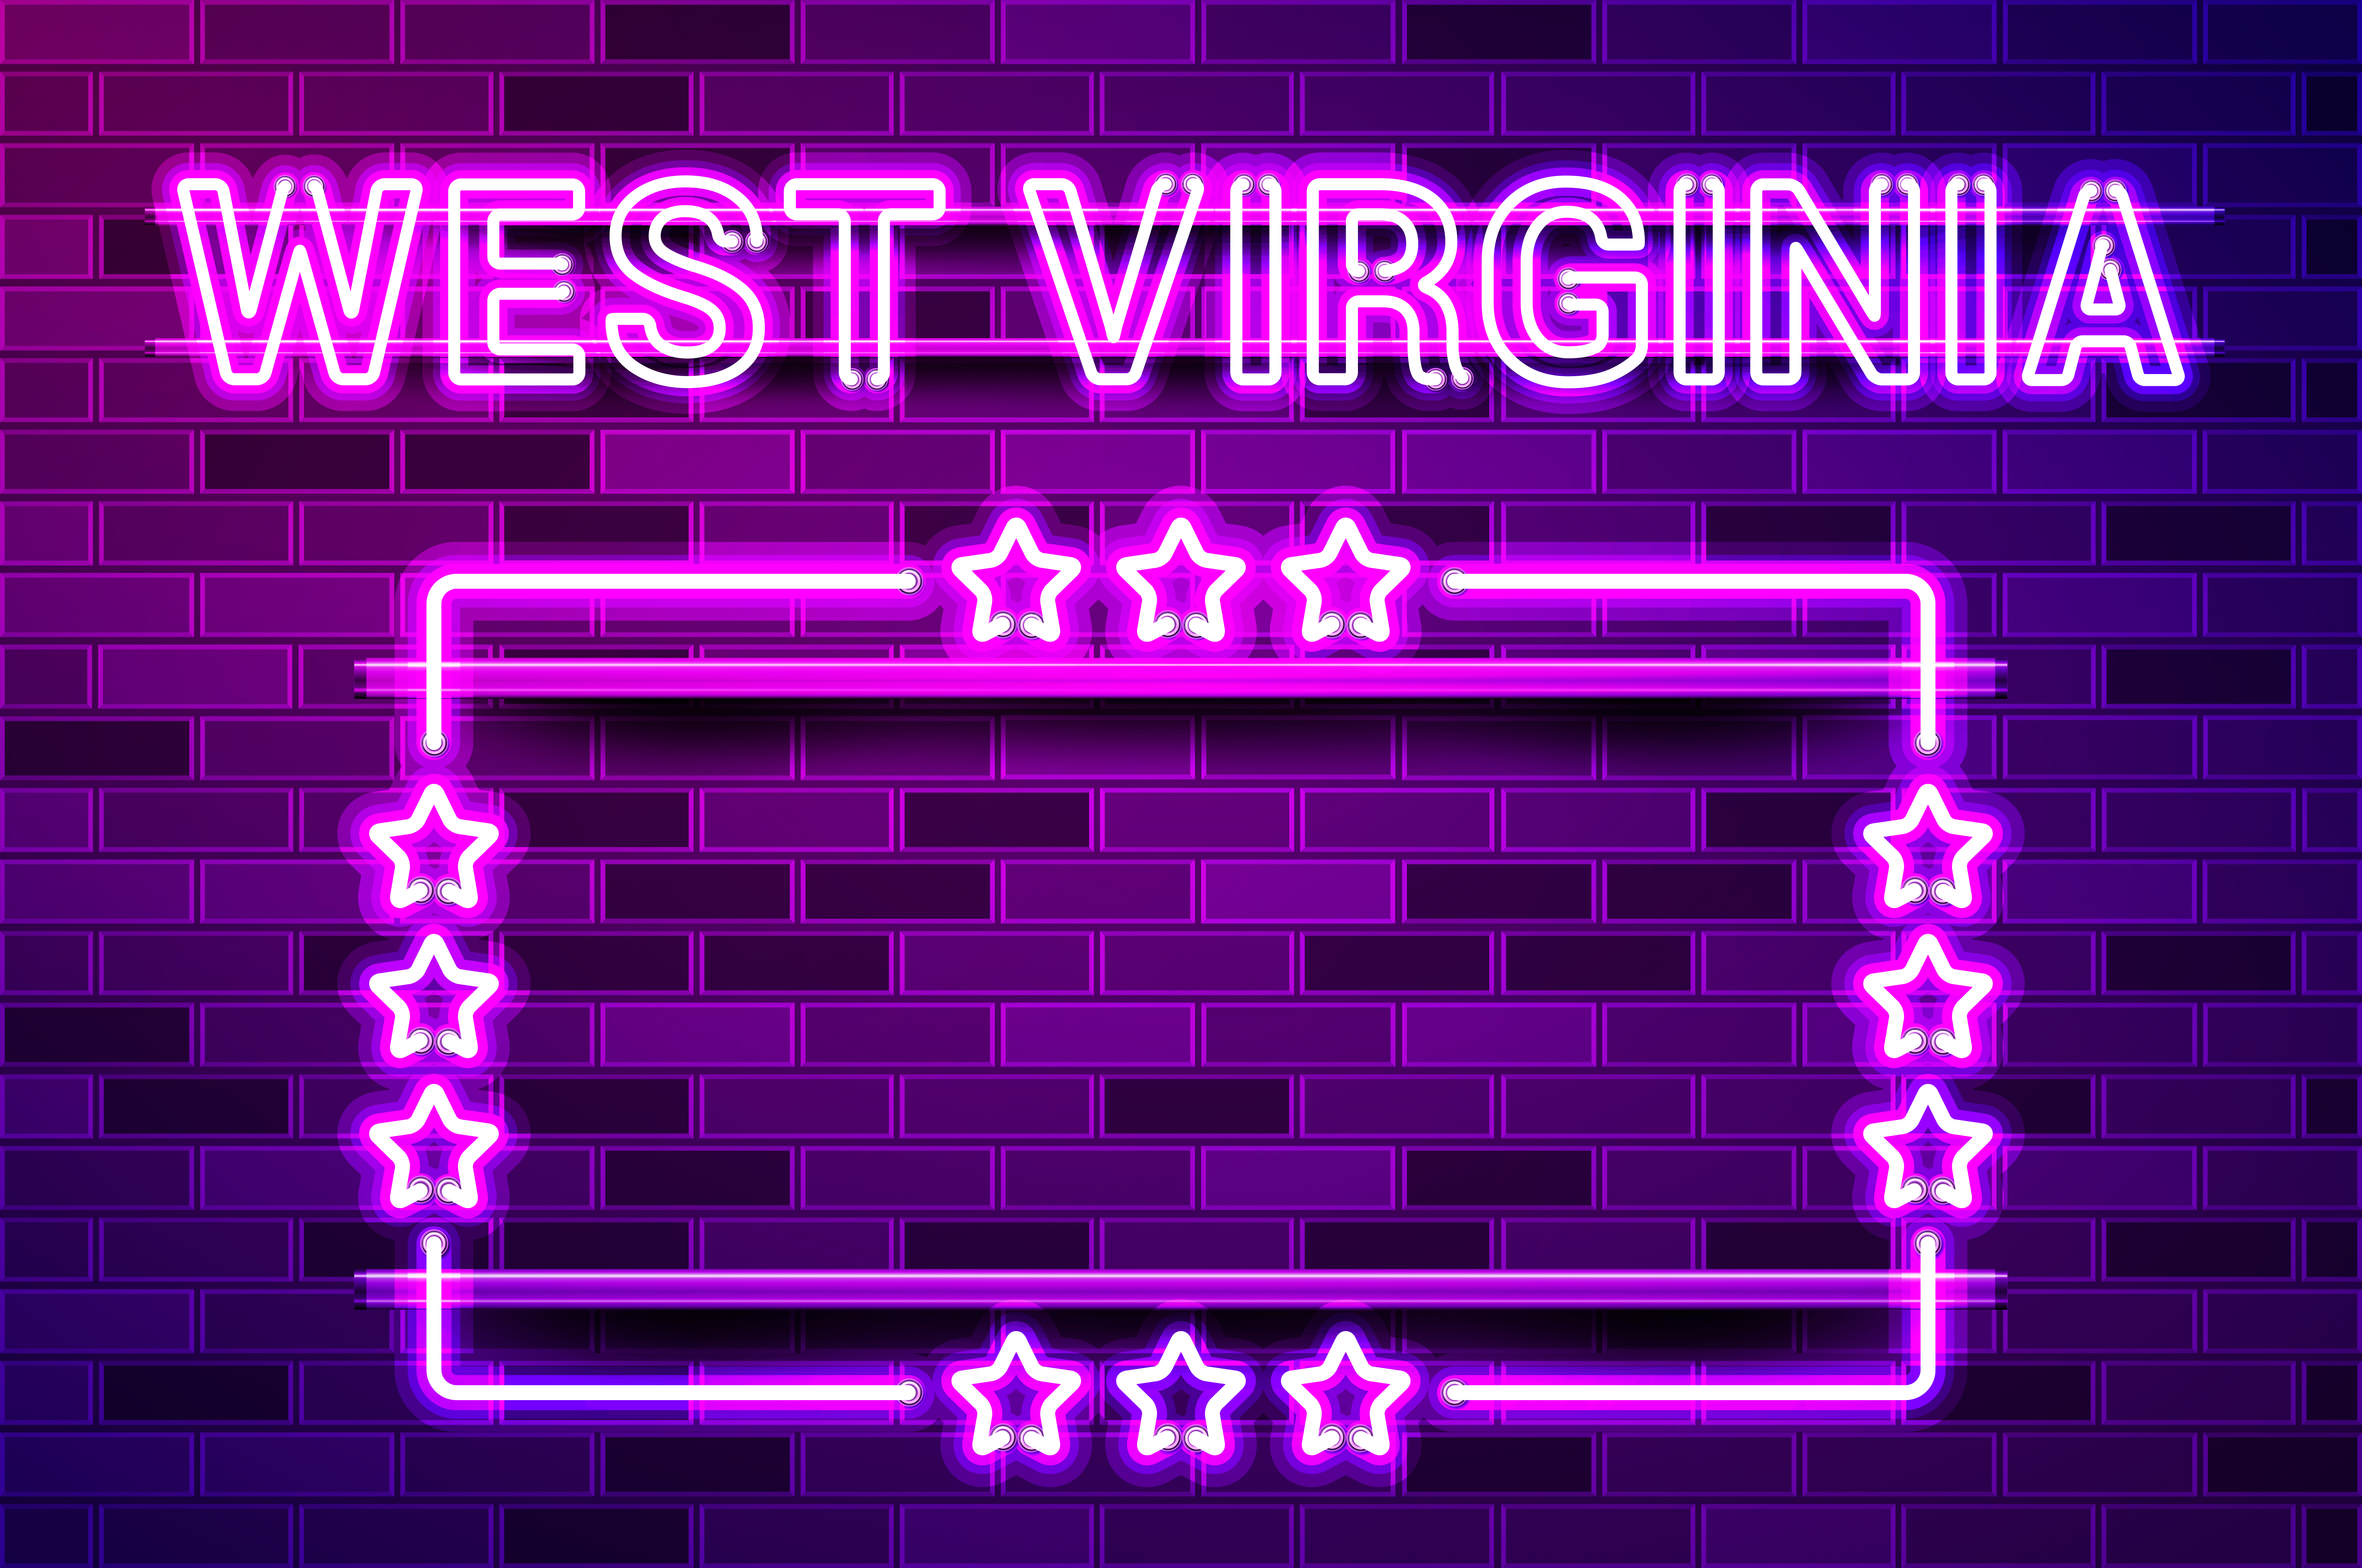 West Virginia US State glowing purple neon lettering and a rectangular frame with stars. Realistic vector illustration. Purple brick wall, violet glow, metal holders.. West Virginia US State glowing purple neon lettering and a rectangular frame with stars